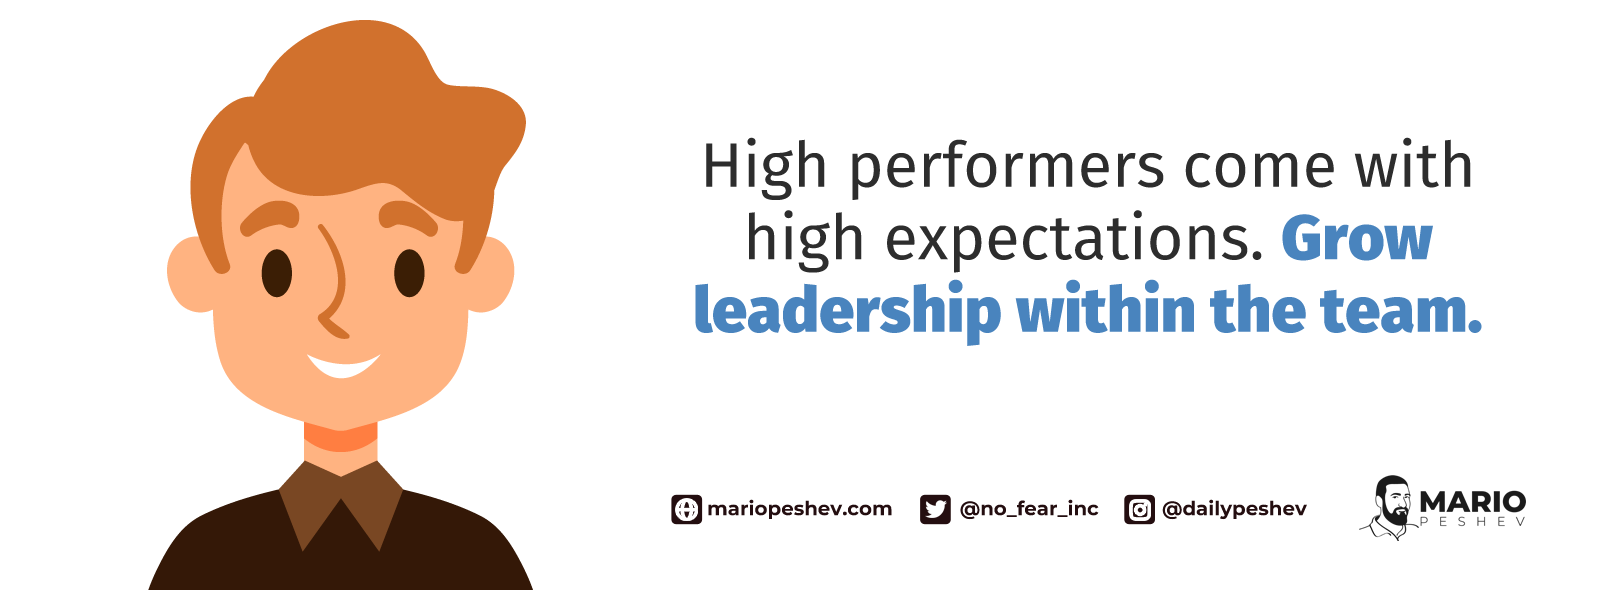 high performers